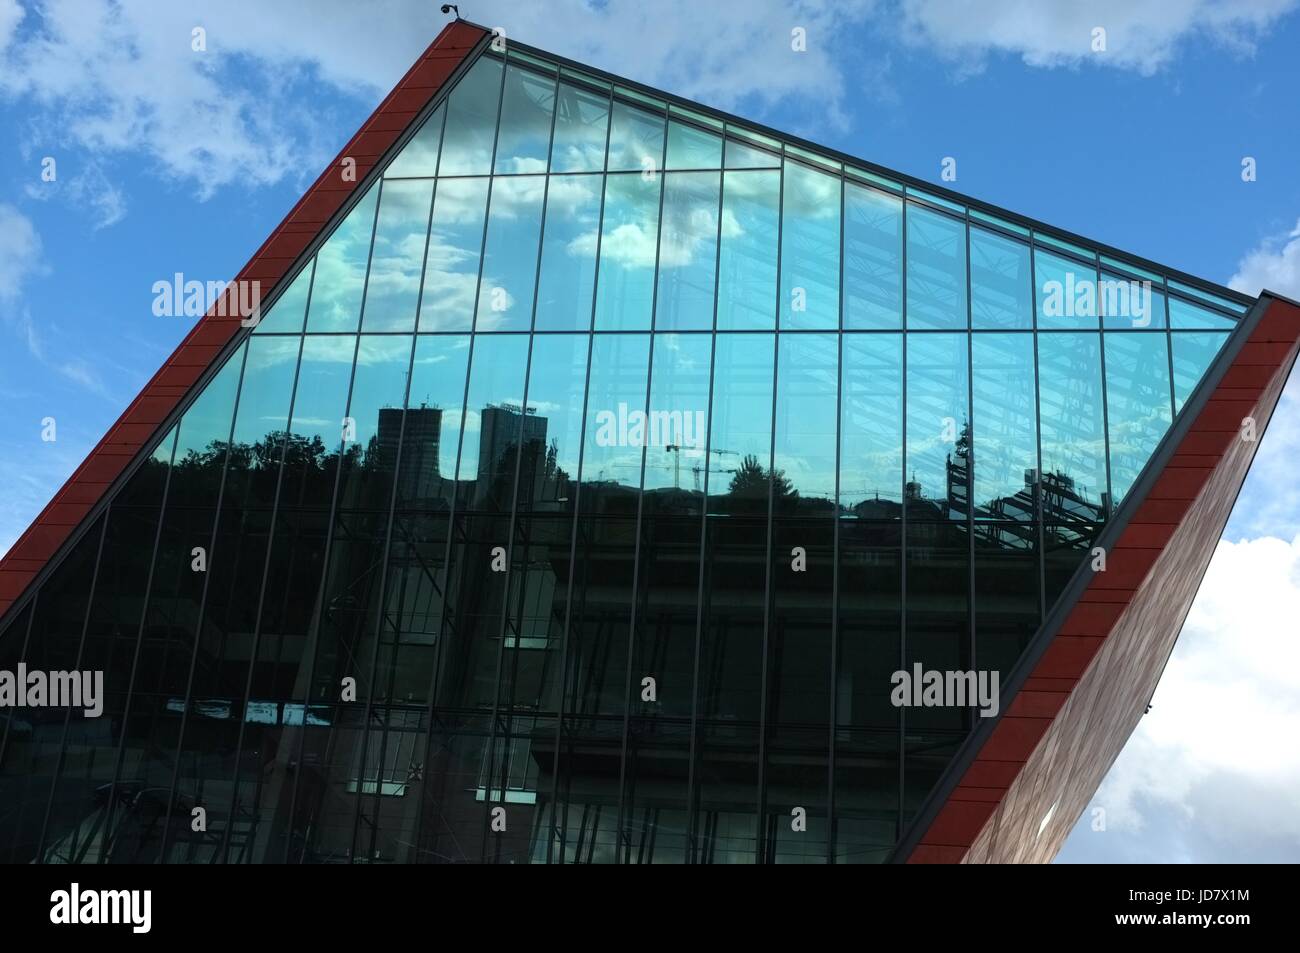 Museum of the Second World War in Gdansk, Poland, central/eastern Europe. June 2017. Stock Photo